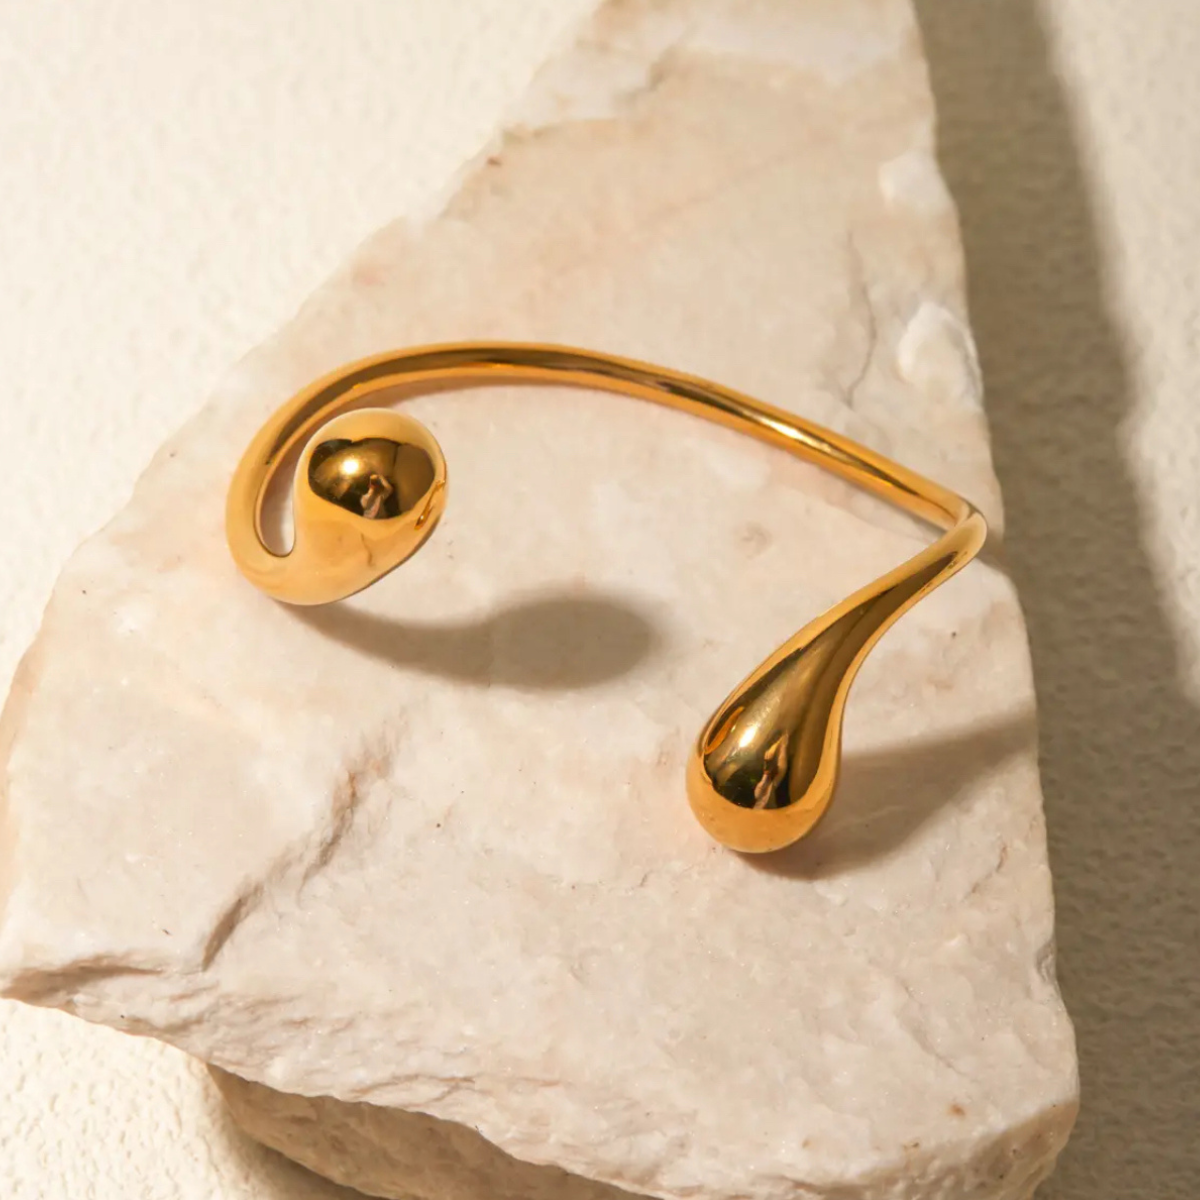 Pour 18k Gold Plated Cuff